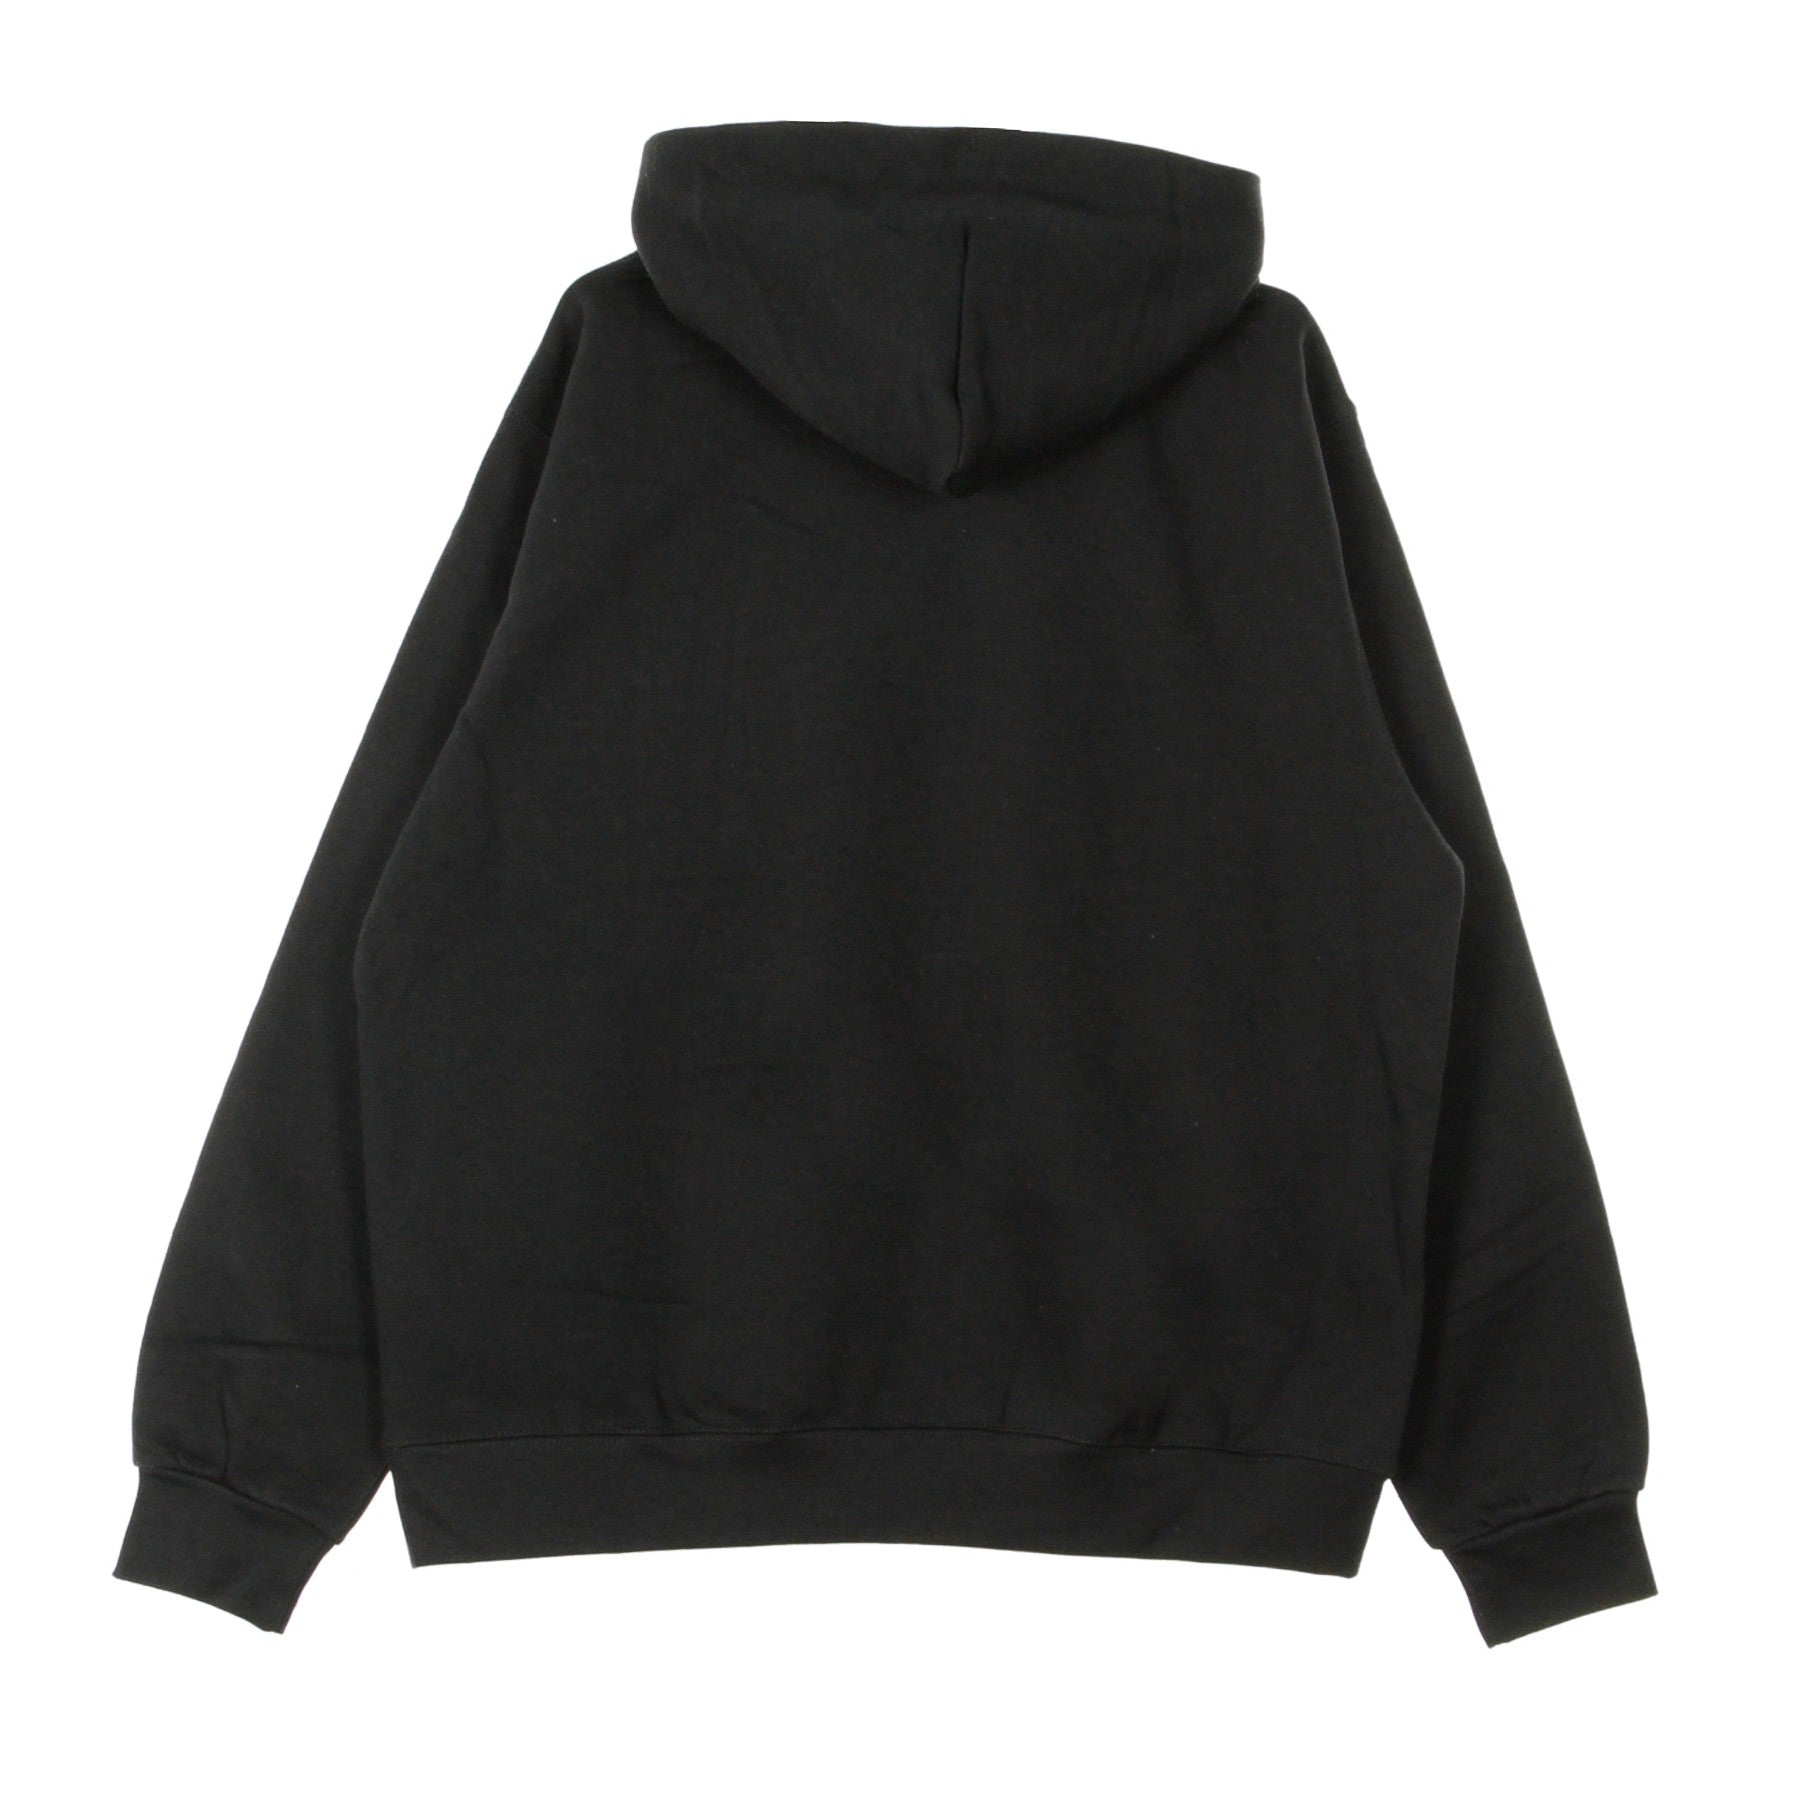 About2 Men's Hoodie